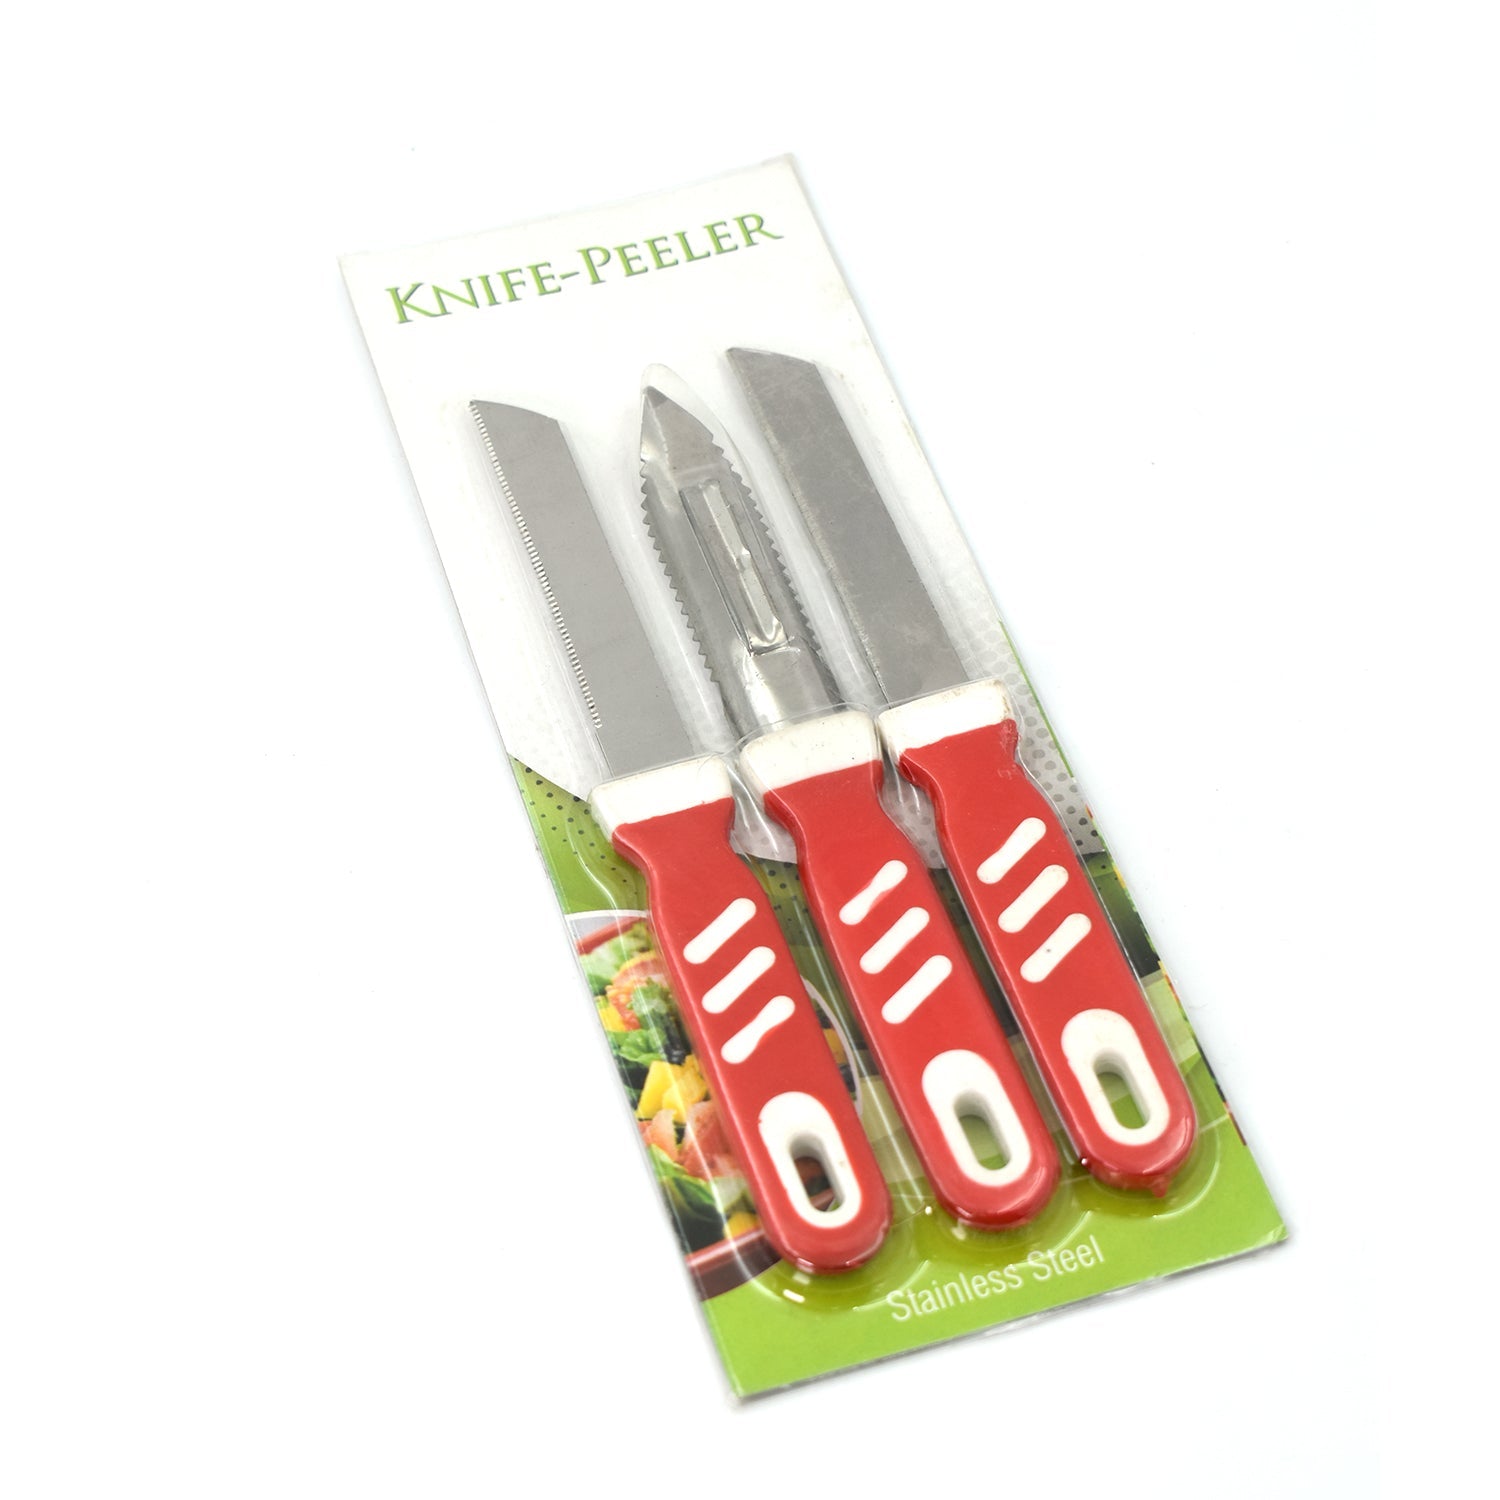 2706 3 Pc Knife Peeler Combo used in all kinds of household and official kitchen places for cutting and peeling types of purposes.